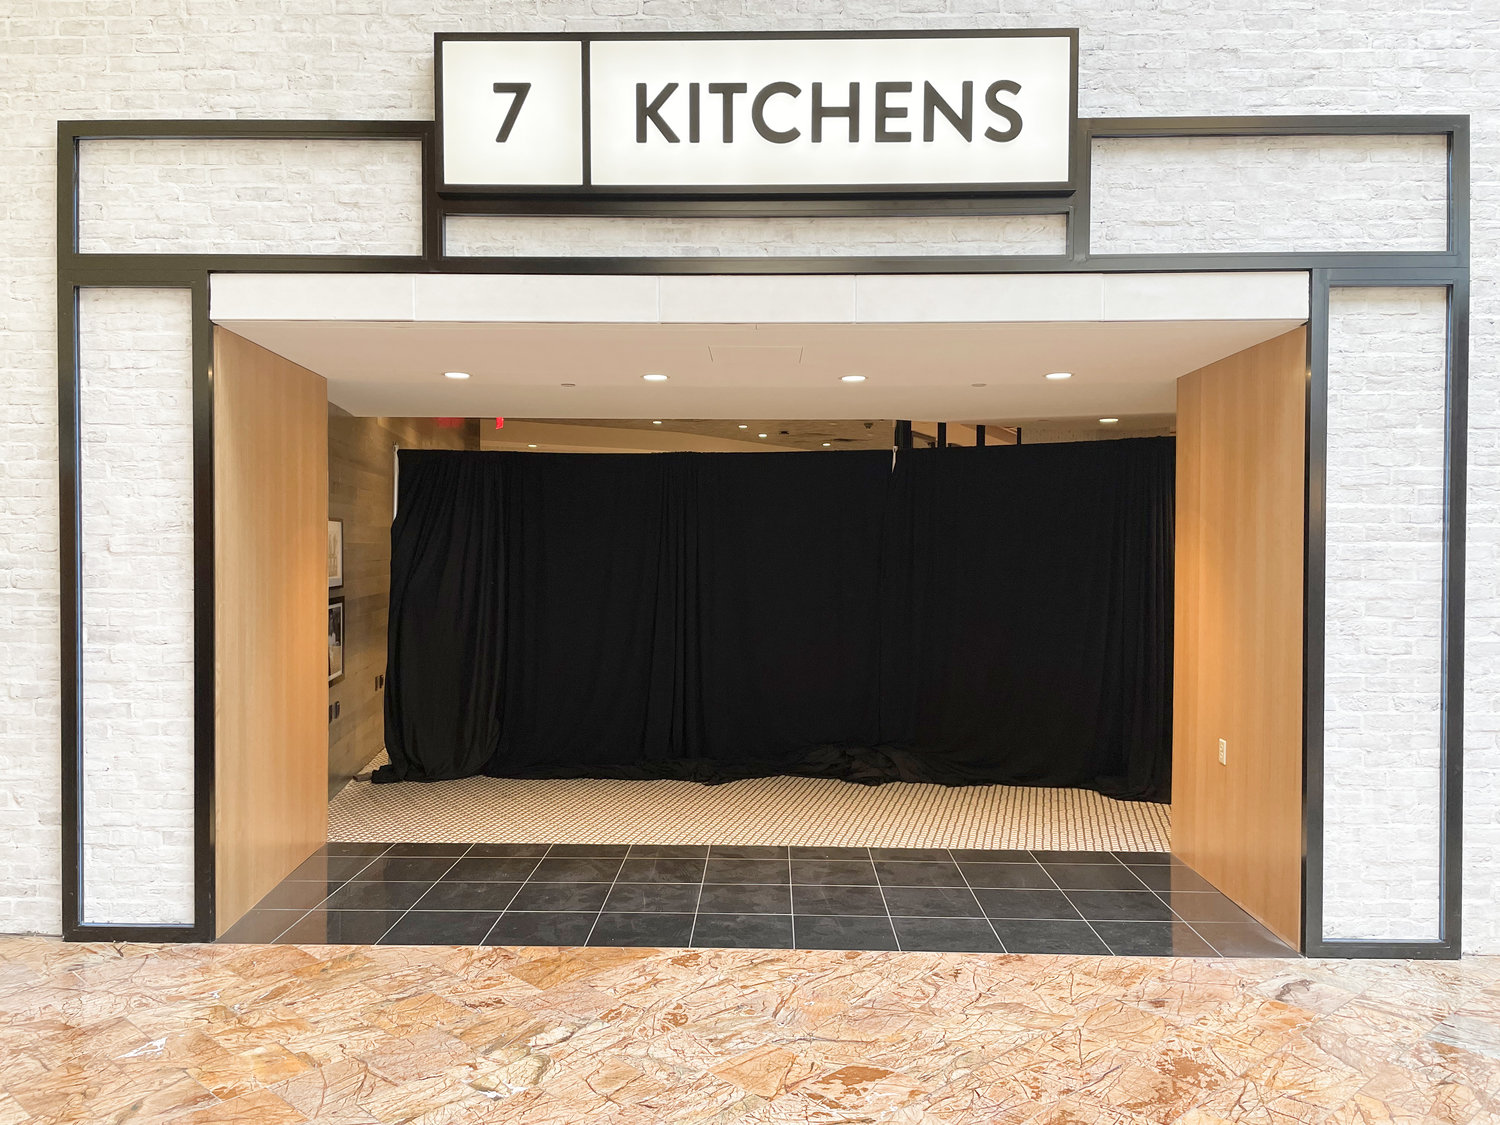 GRAND OPENING — Highly anticipated, Turning Stone’s 7 Kitchens buffet is slated to open its doors on April 29